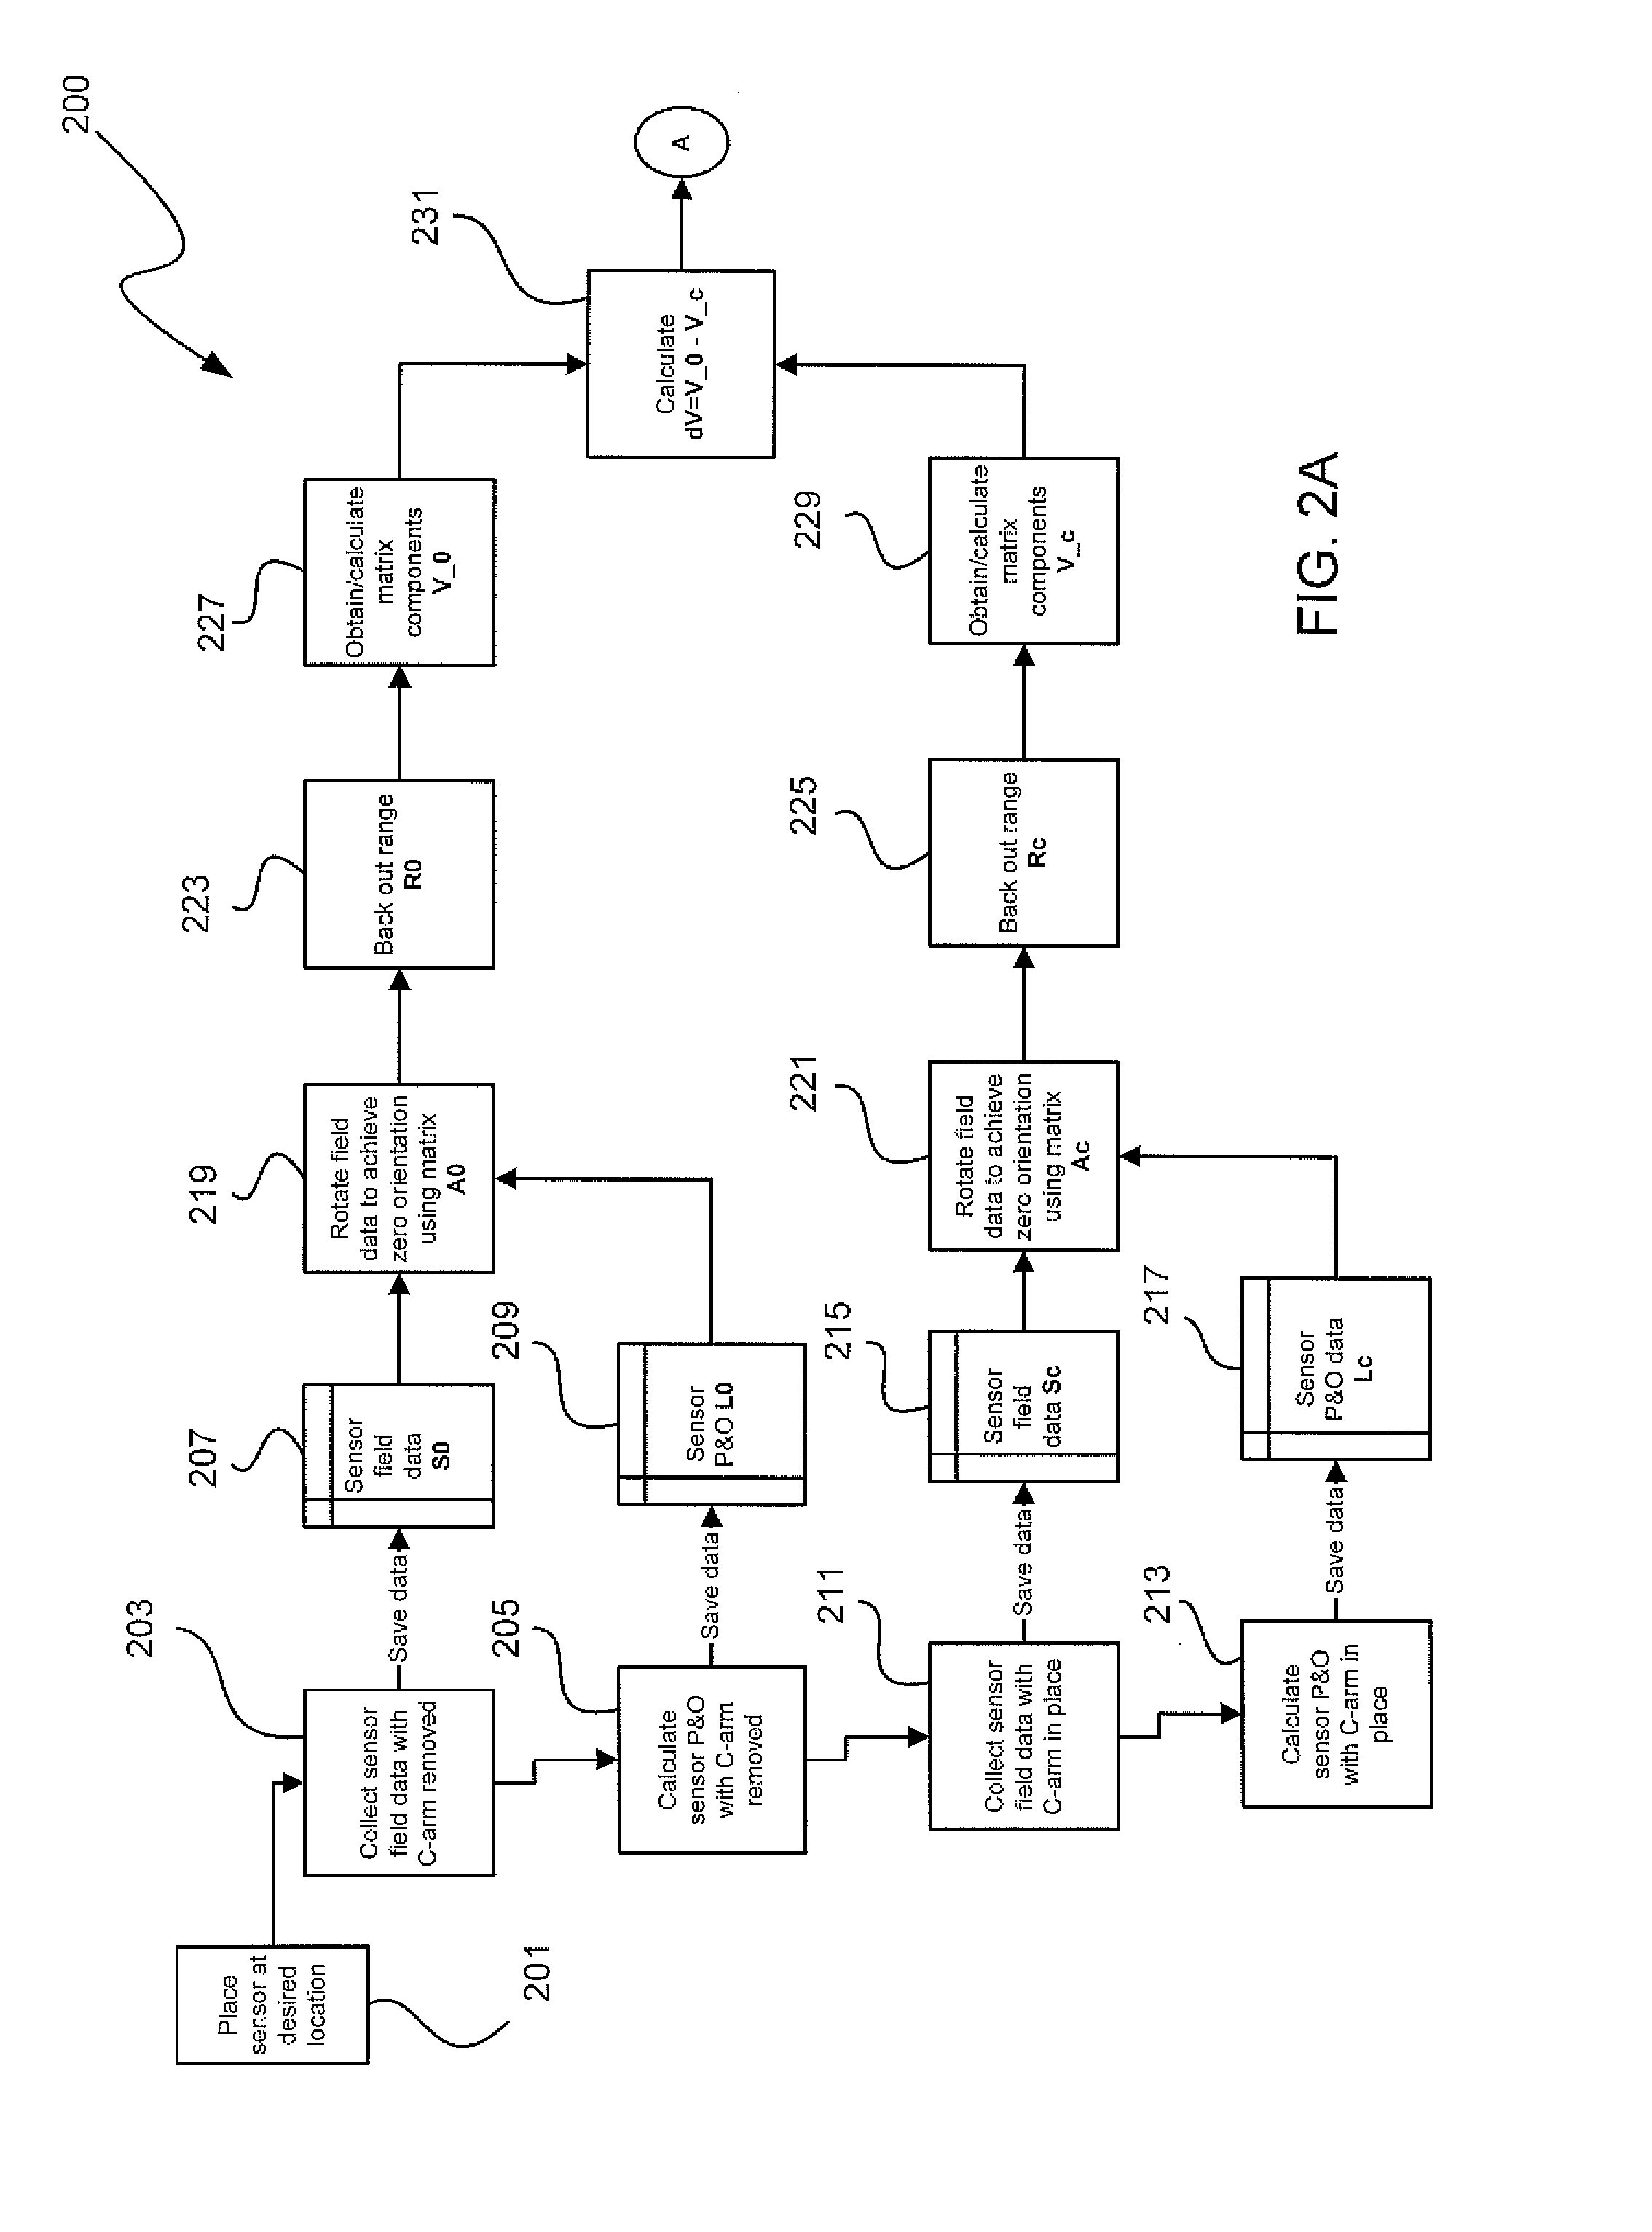 Systems and Methods for Compensating for Large Moving Objects in Magnetic-Tracking Environments